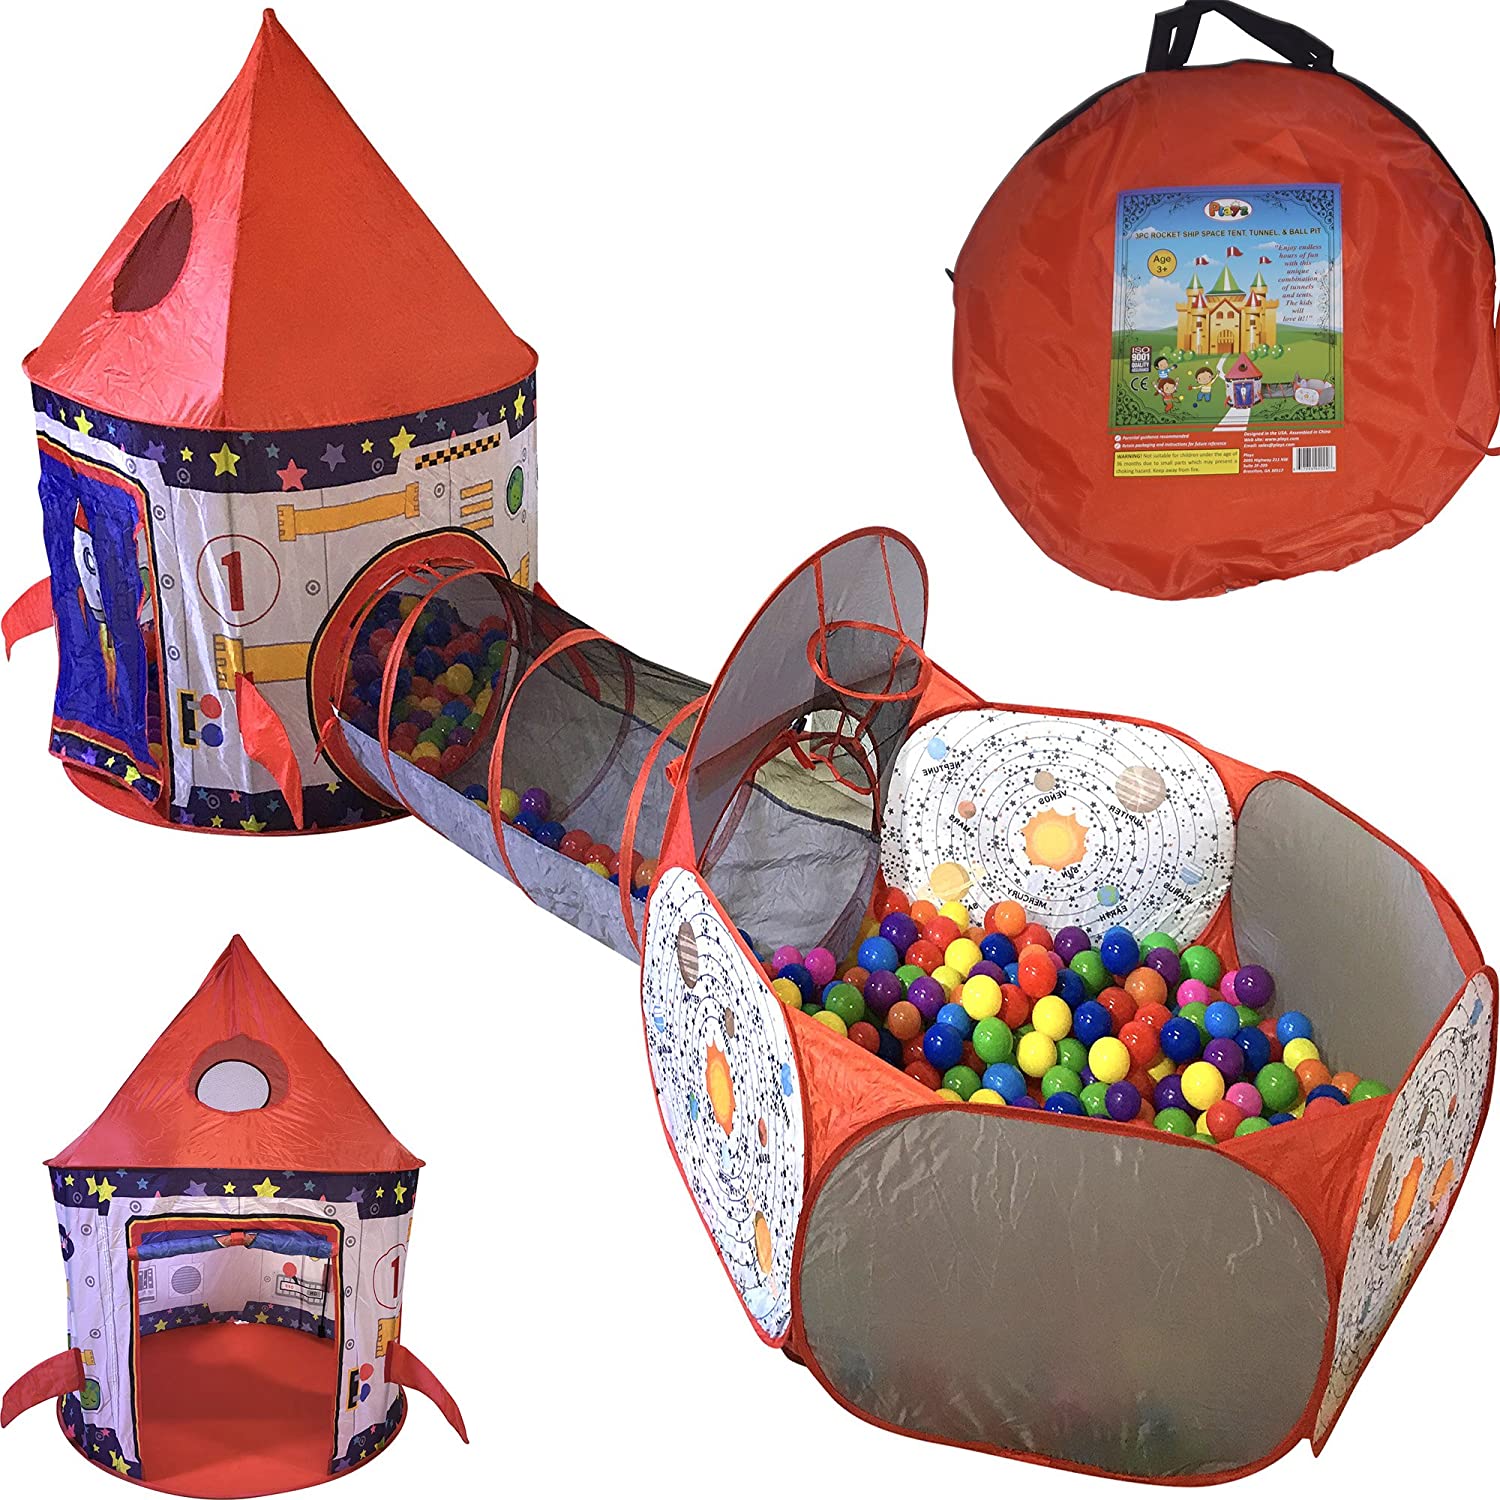 Top 9 Best Ball Pit for Kids Reviews in 2023 7